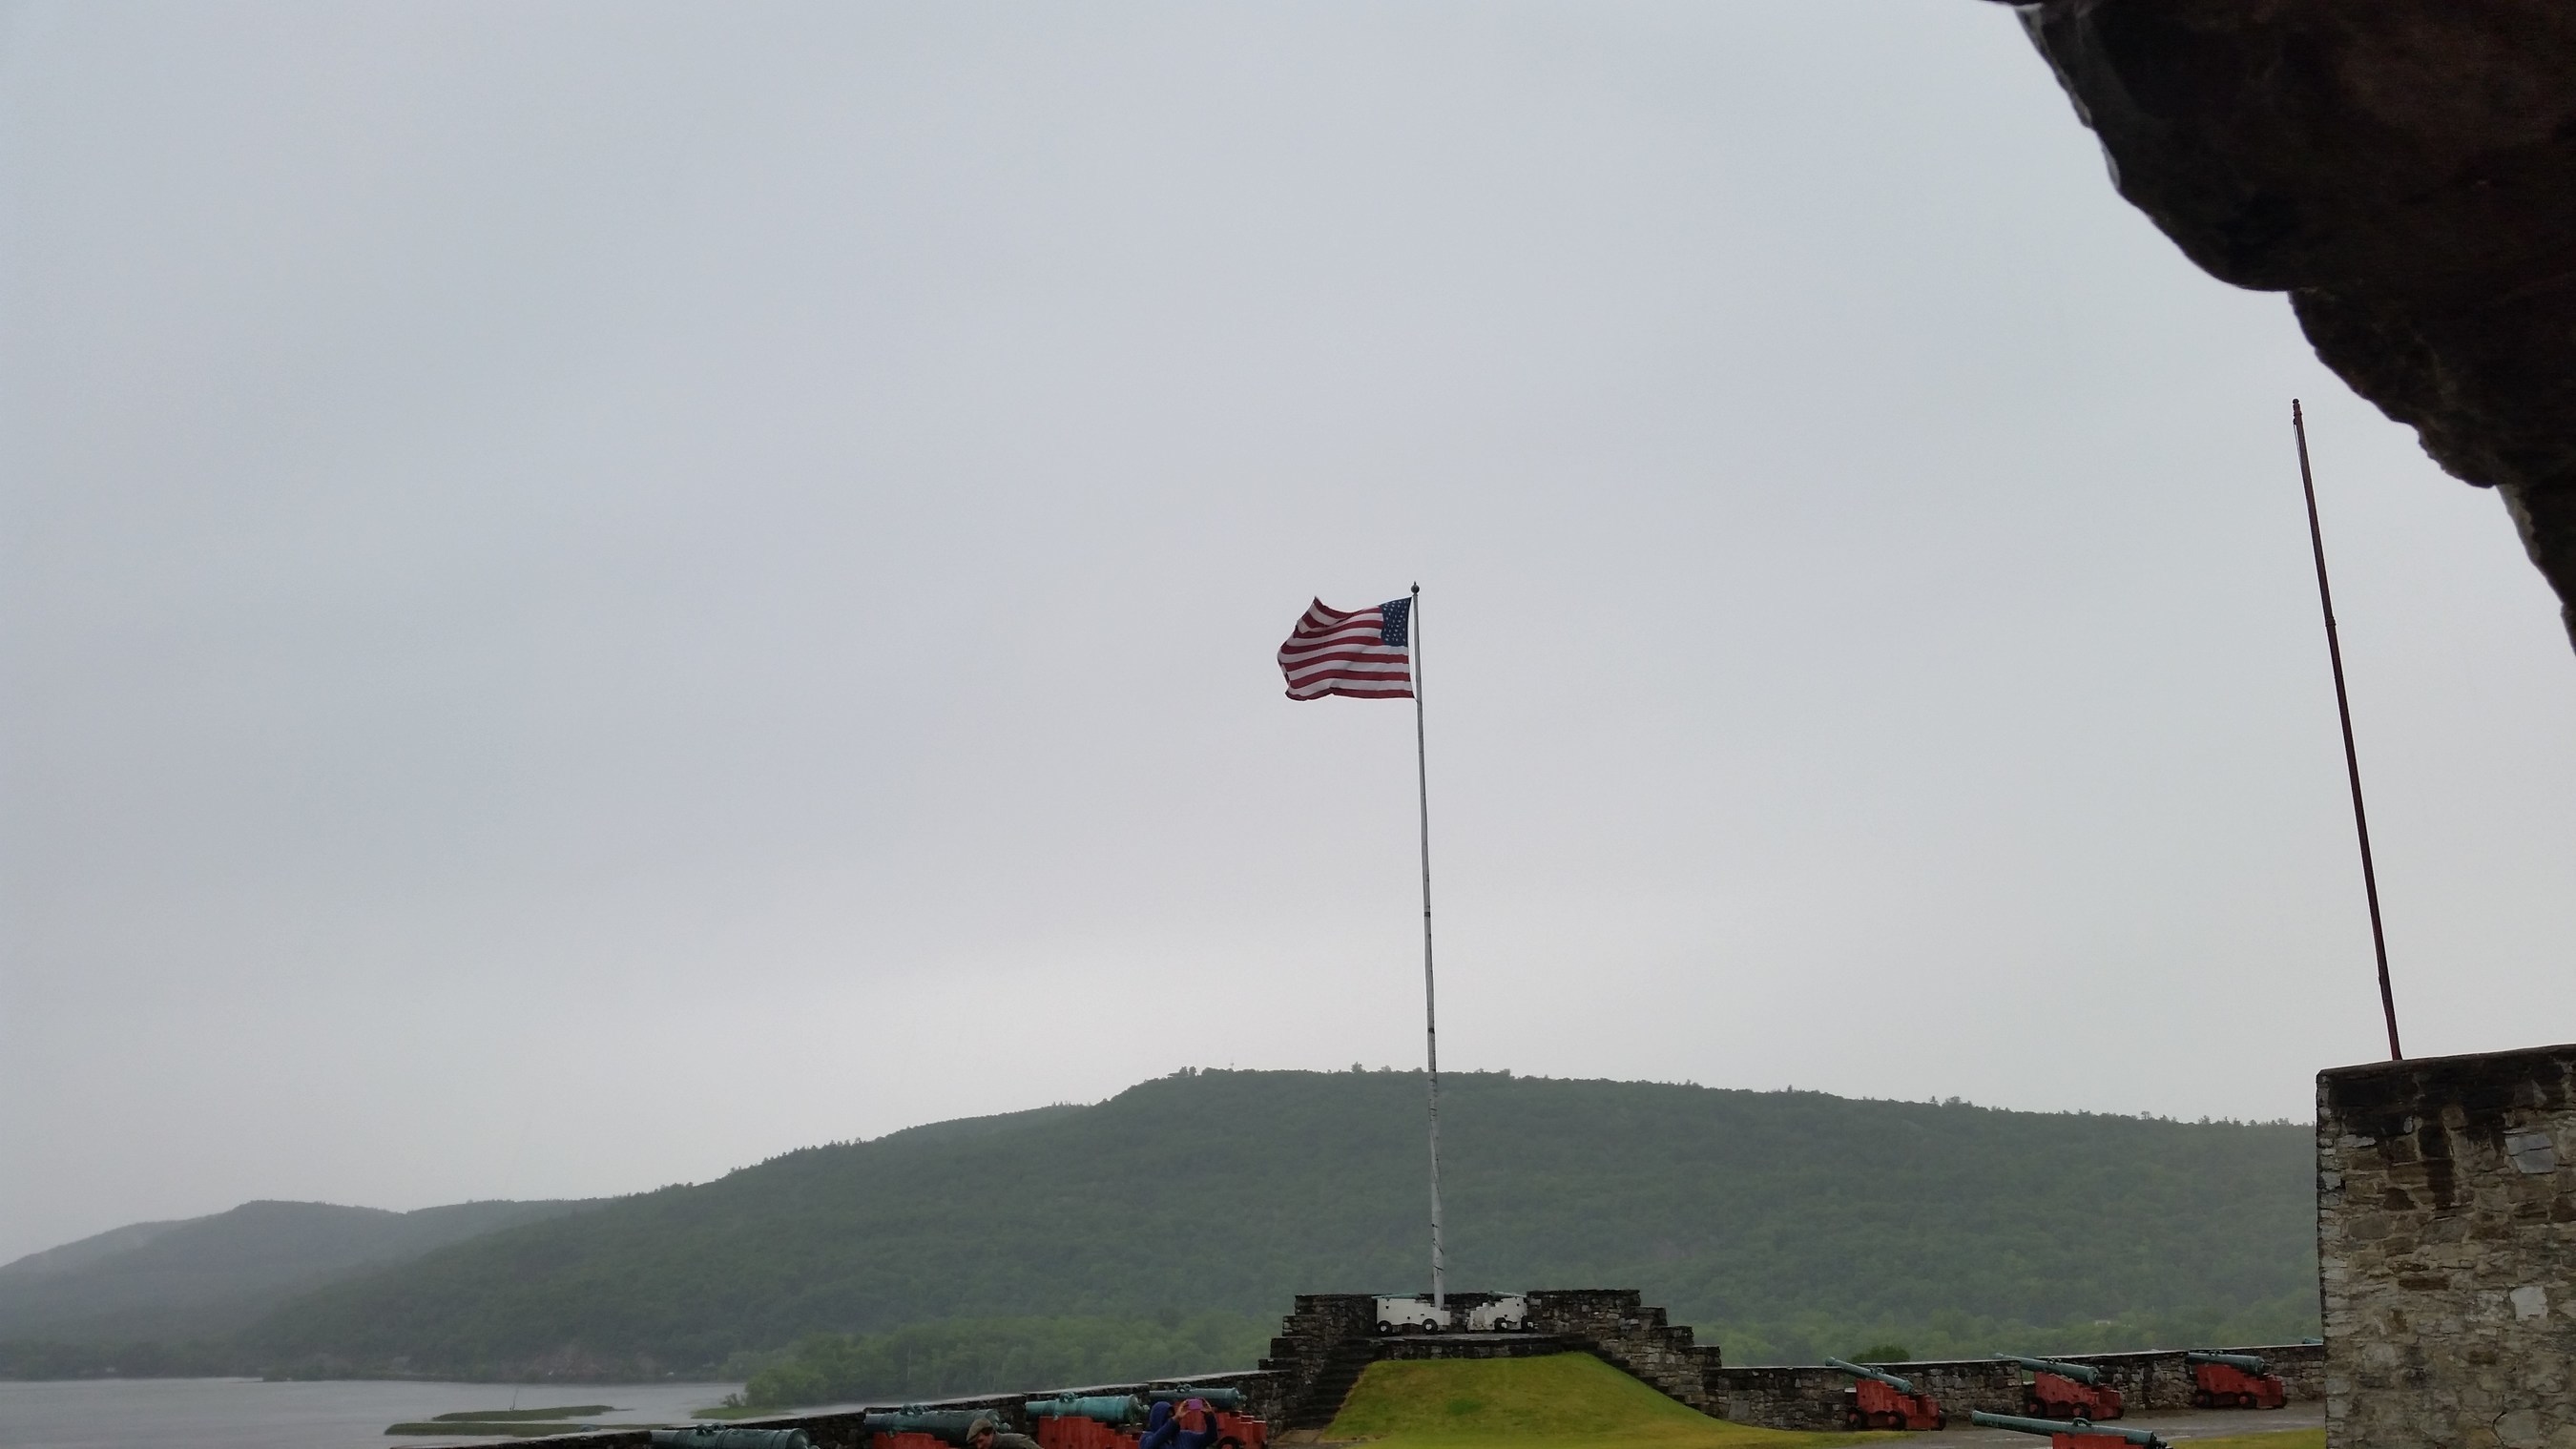 Injured veterans recently toured Fort Ticonderoga with Wounded Warrior Project in Ticonderoga, N.Y. During the tour, warriors saw many areas and features, including a platform where the American flag flies toward Lake Champlain with Mount Defiance in the background. Image provided by warrior Eddie Carliell.